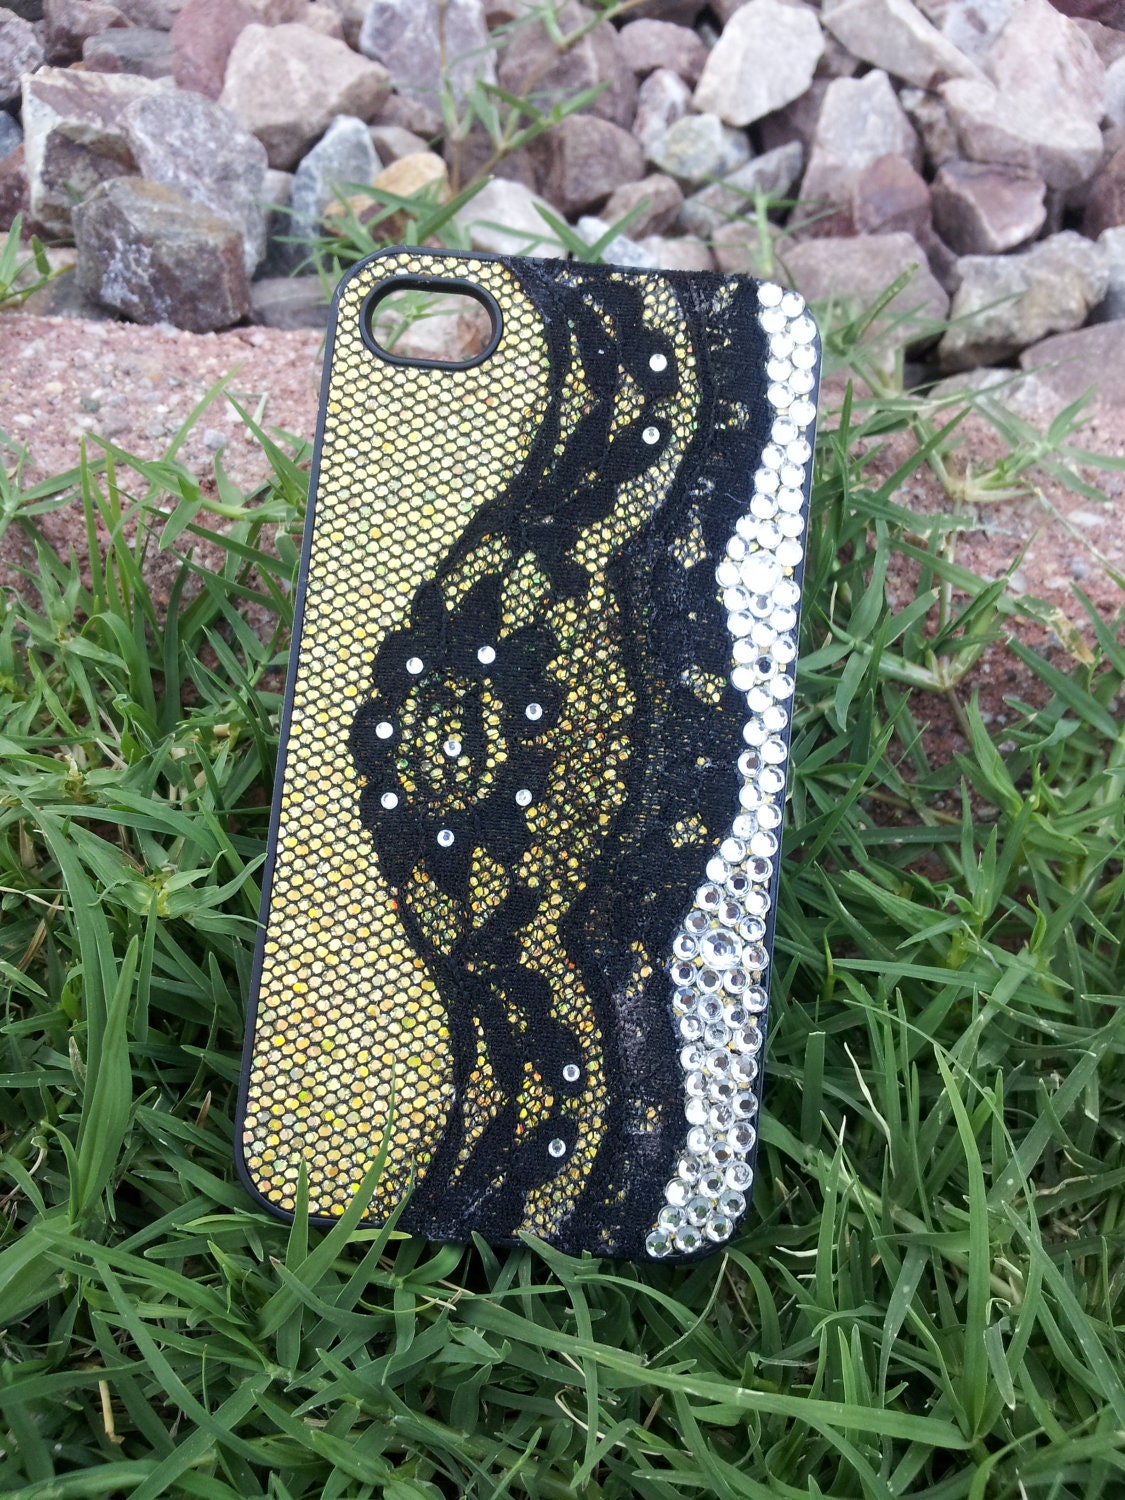 iPhone 4 4s Case Gold Glitter Black Lace Rhinestones Bling Silver design cell phone cover